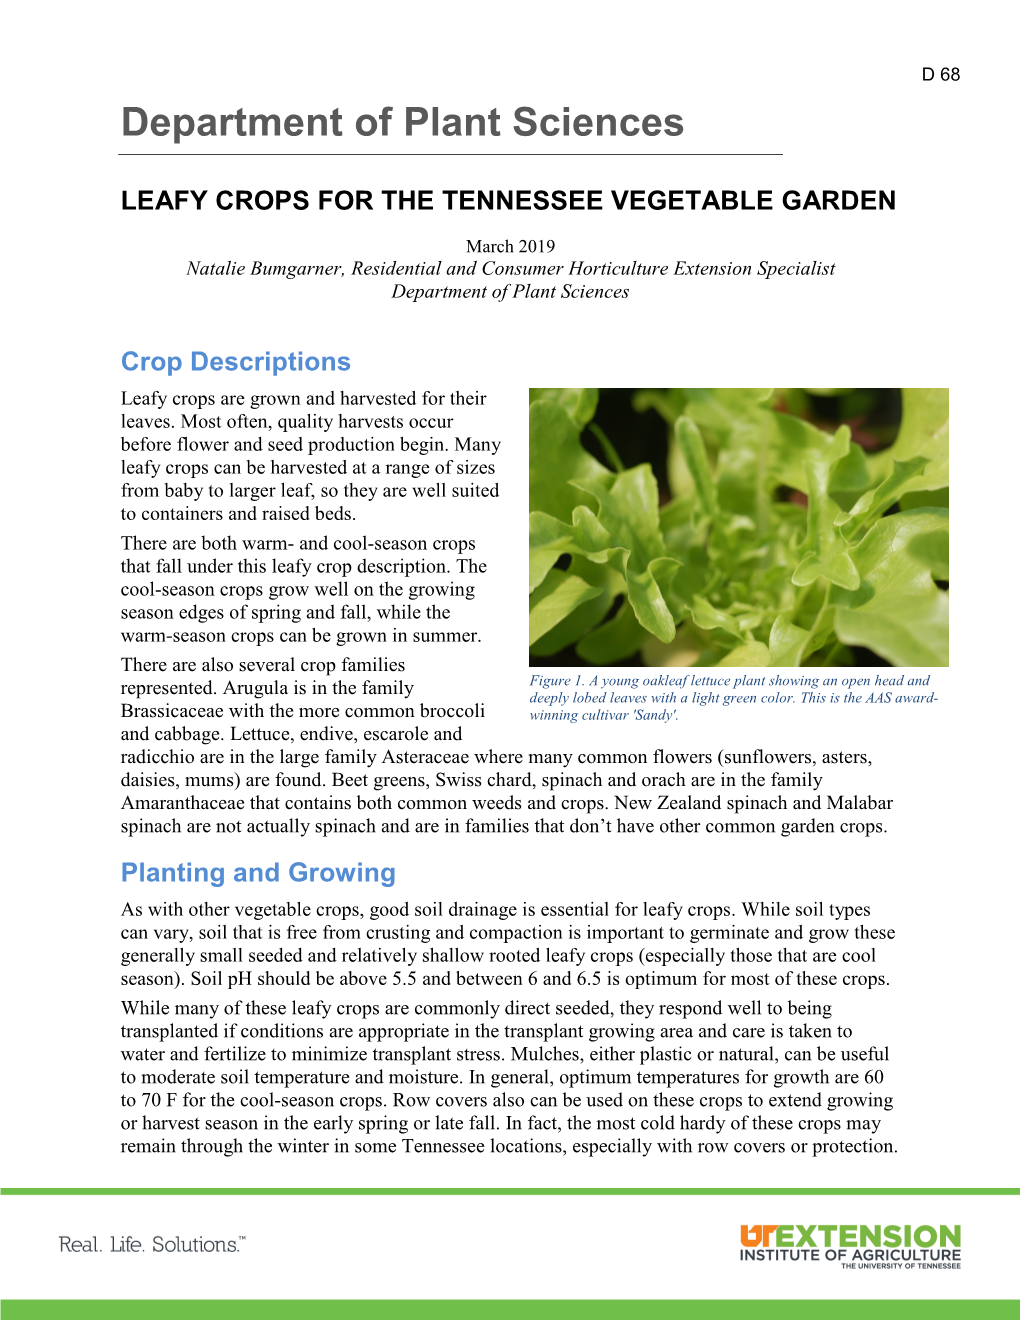 D 68 Leafy Crops for the Tennessee Vegetable Garden